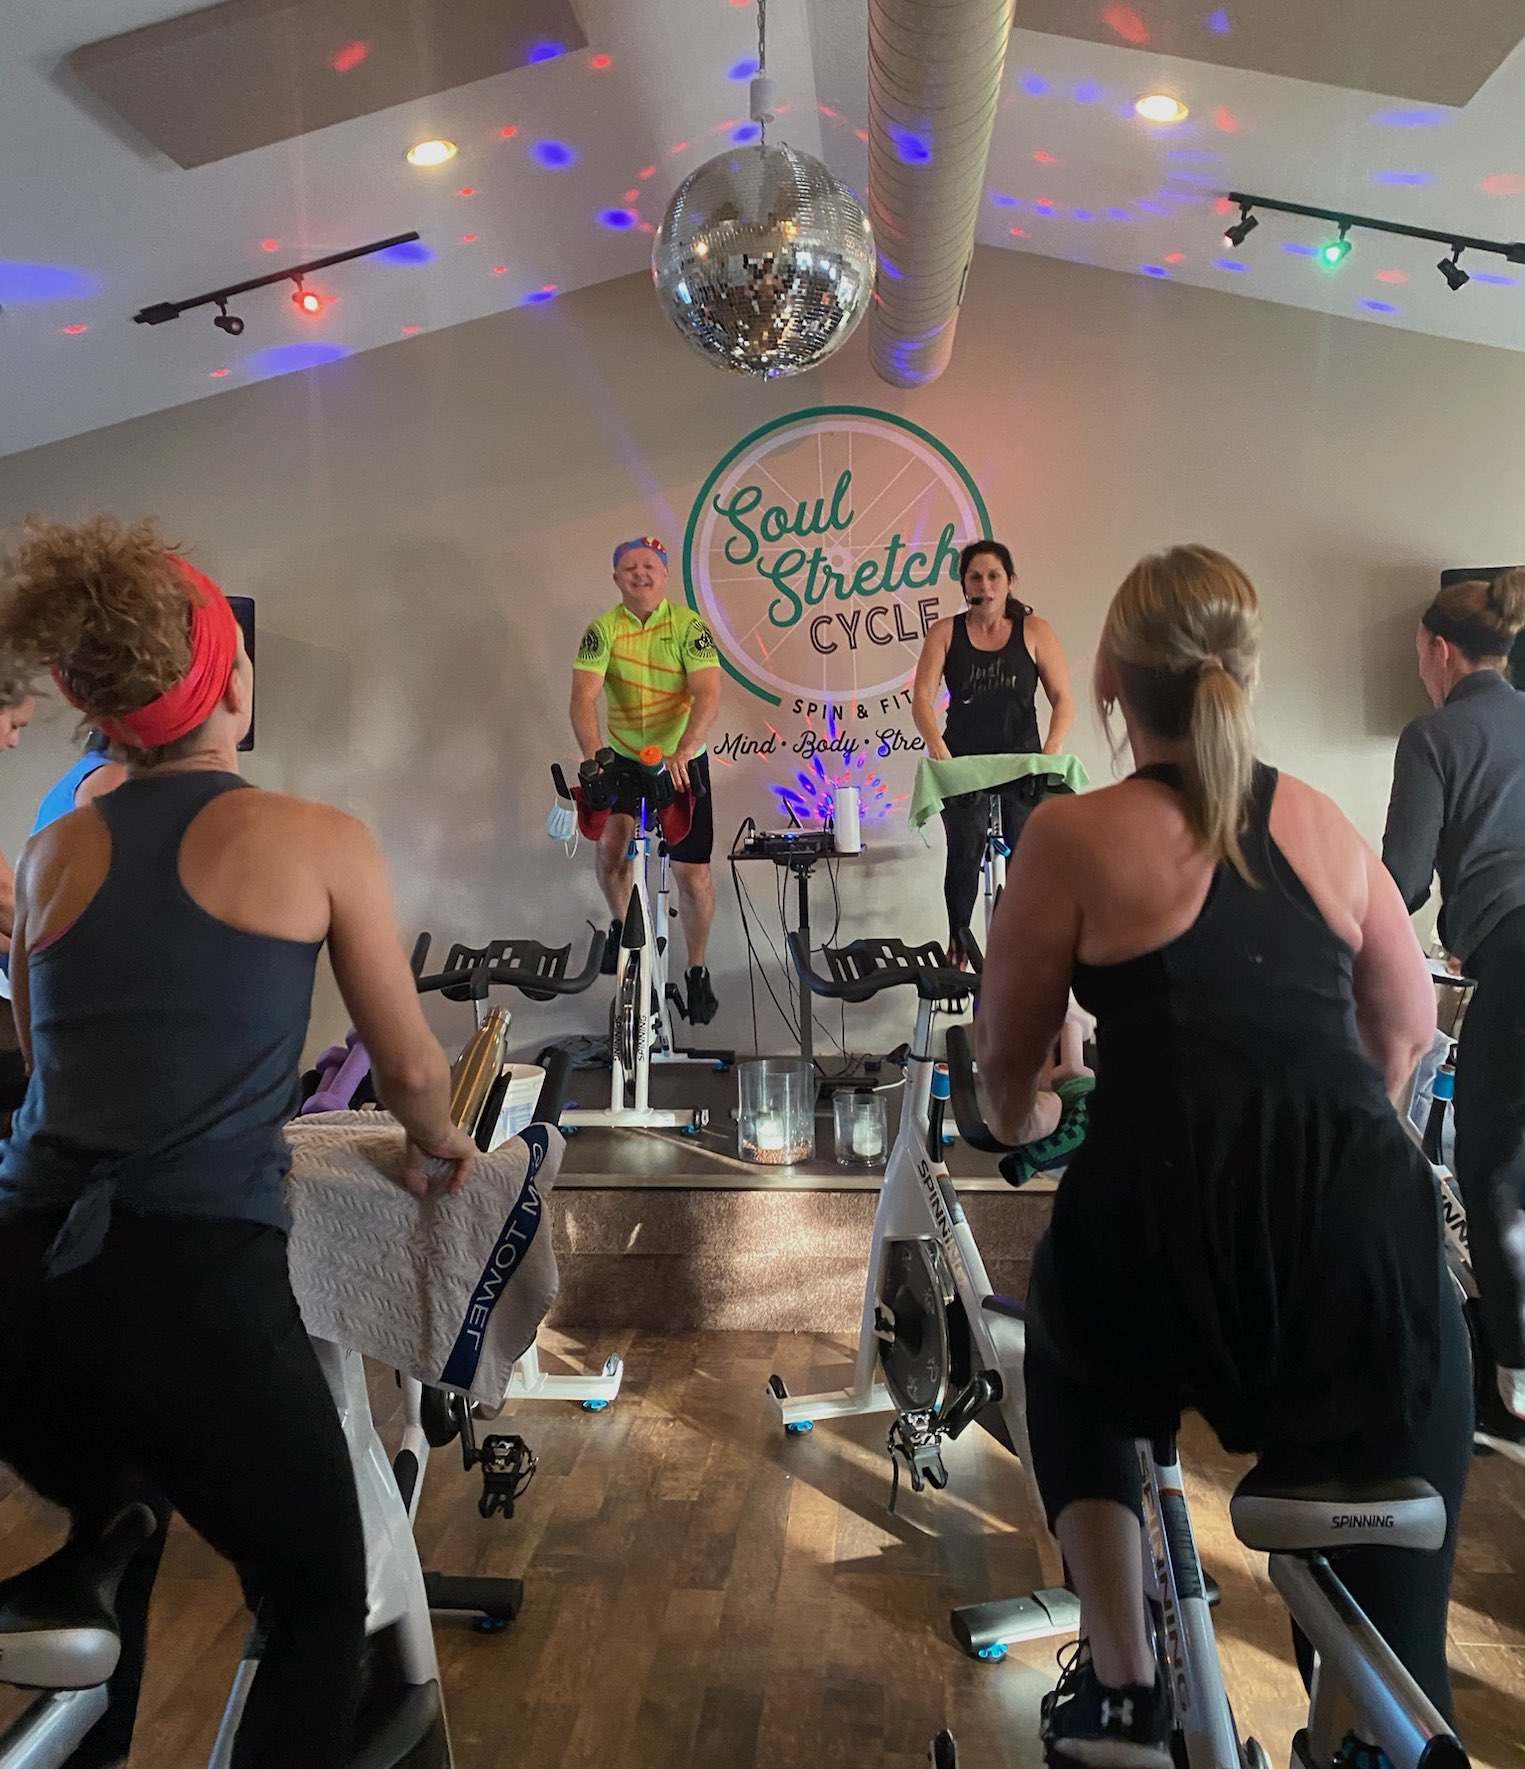 Soul Stretch Cycle Spin Studio